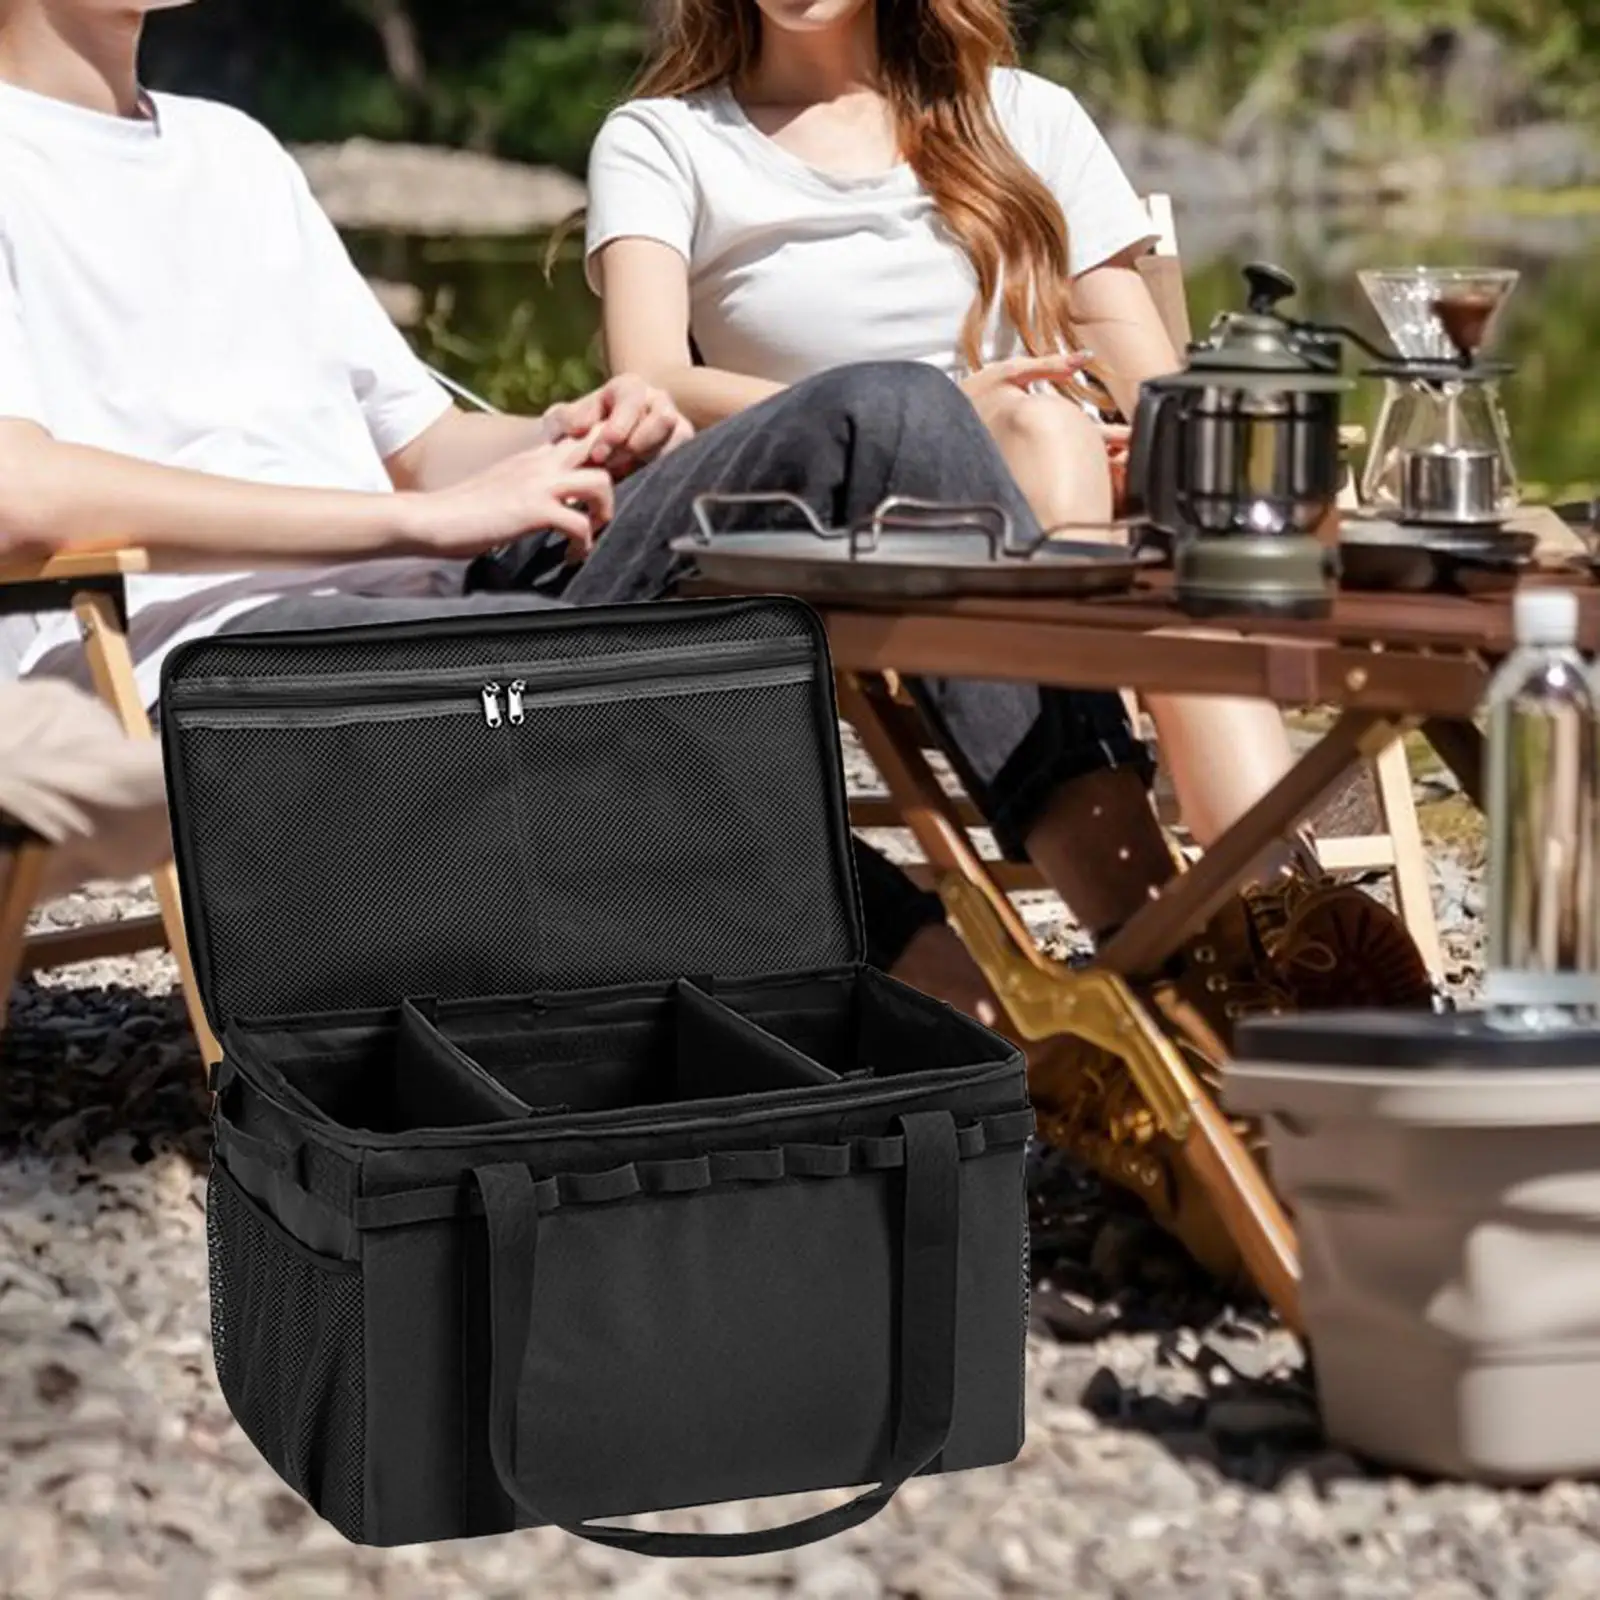 Outdoor Picnic Storage Bag Utility carry Bag Stylish Design Lightweight Sturdy for Family Hiking Foldable Versatile